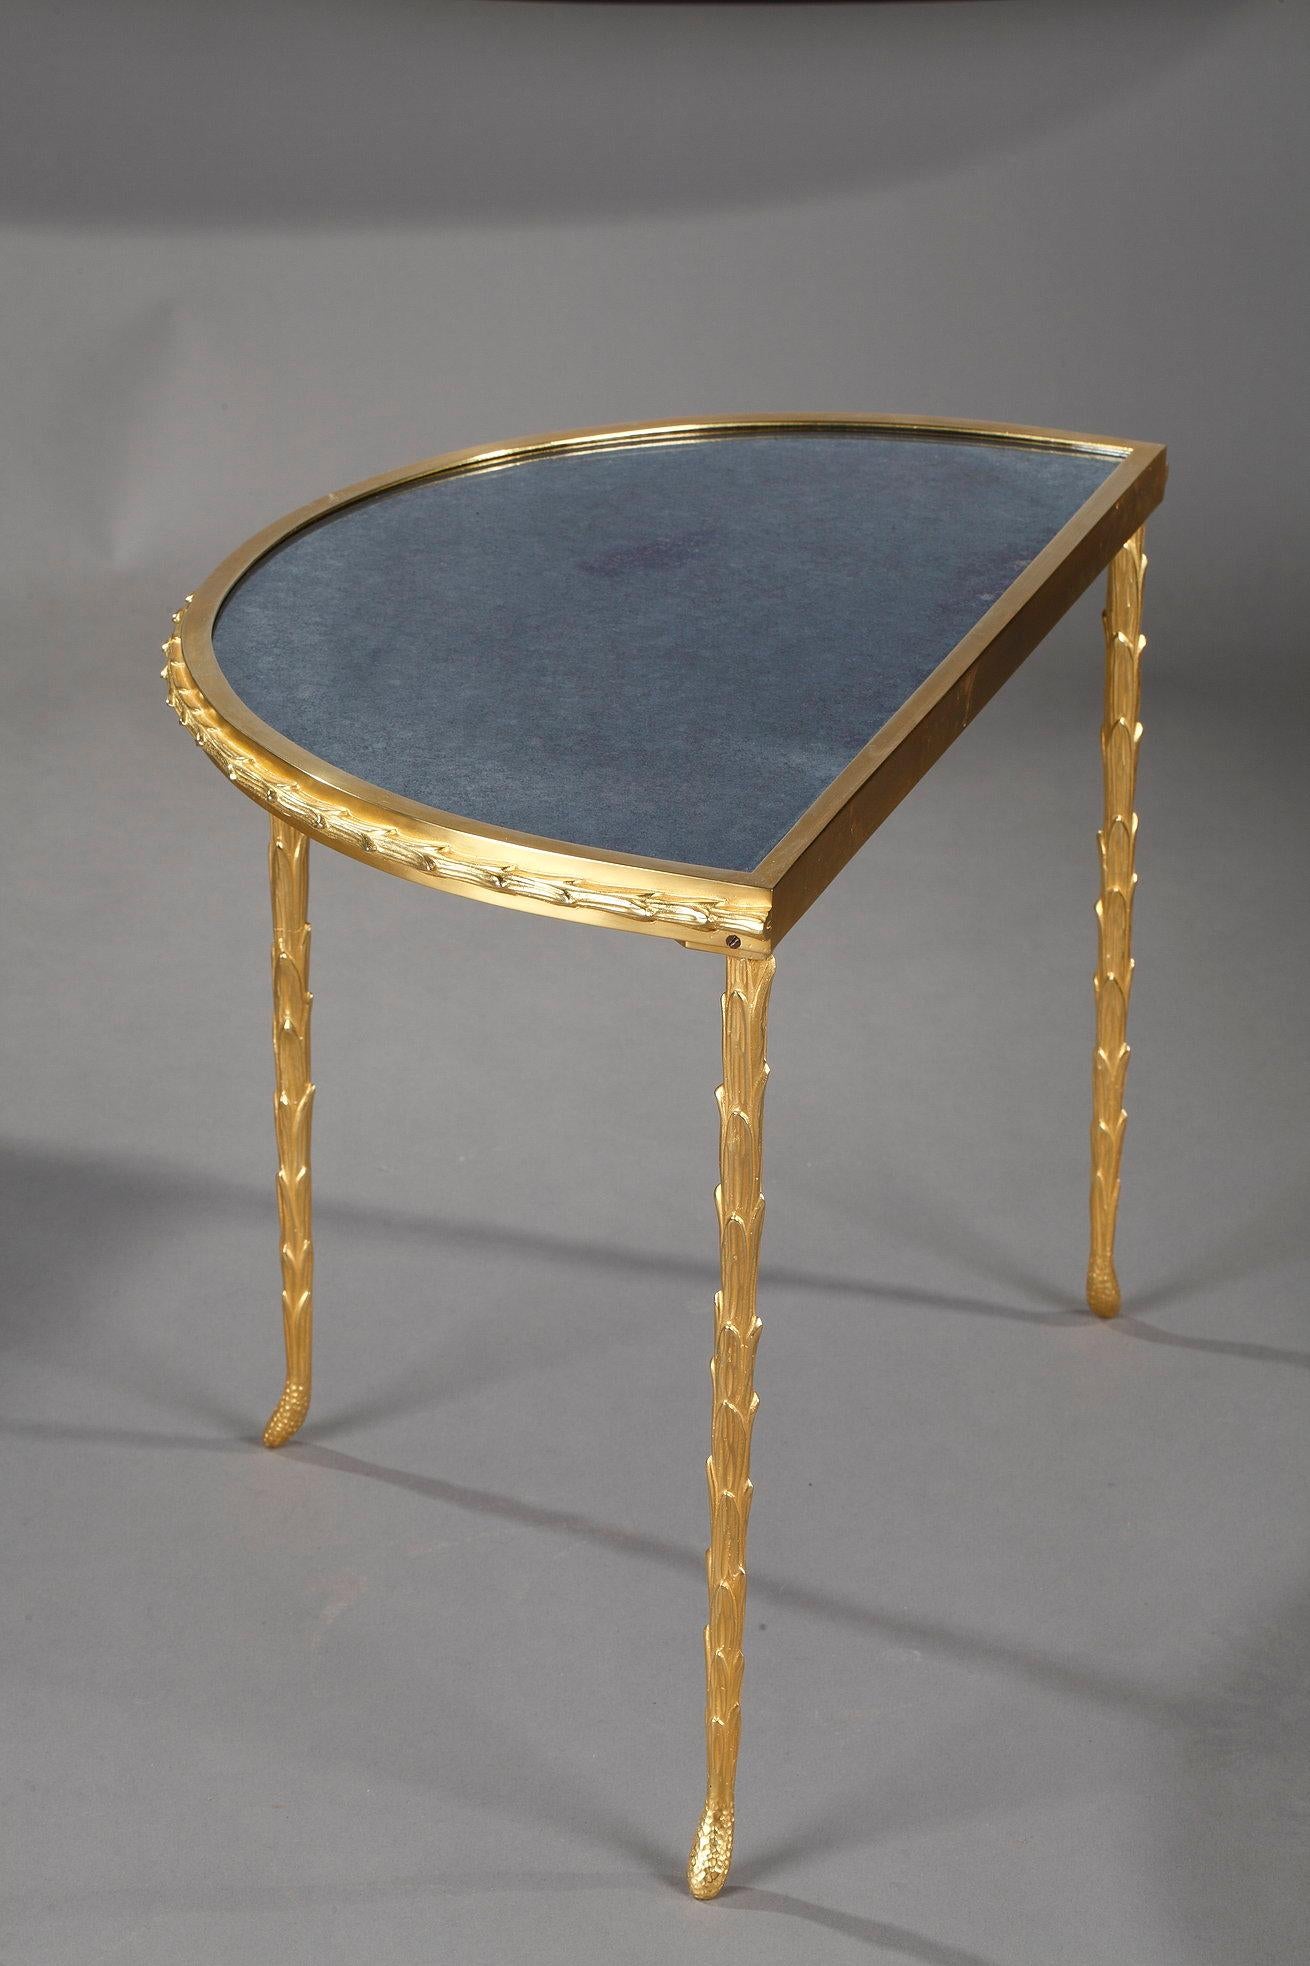 Mid-20th Century Small Half Moon Table with Aged Mirror Top in Bronze, Maison Baguès For Sale